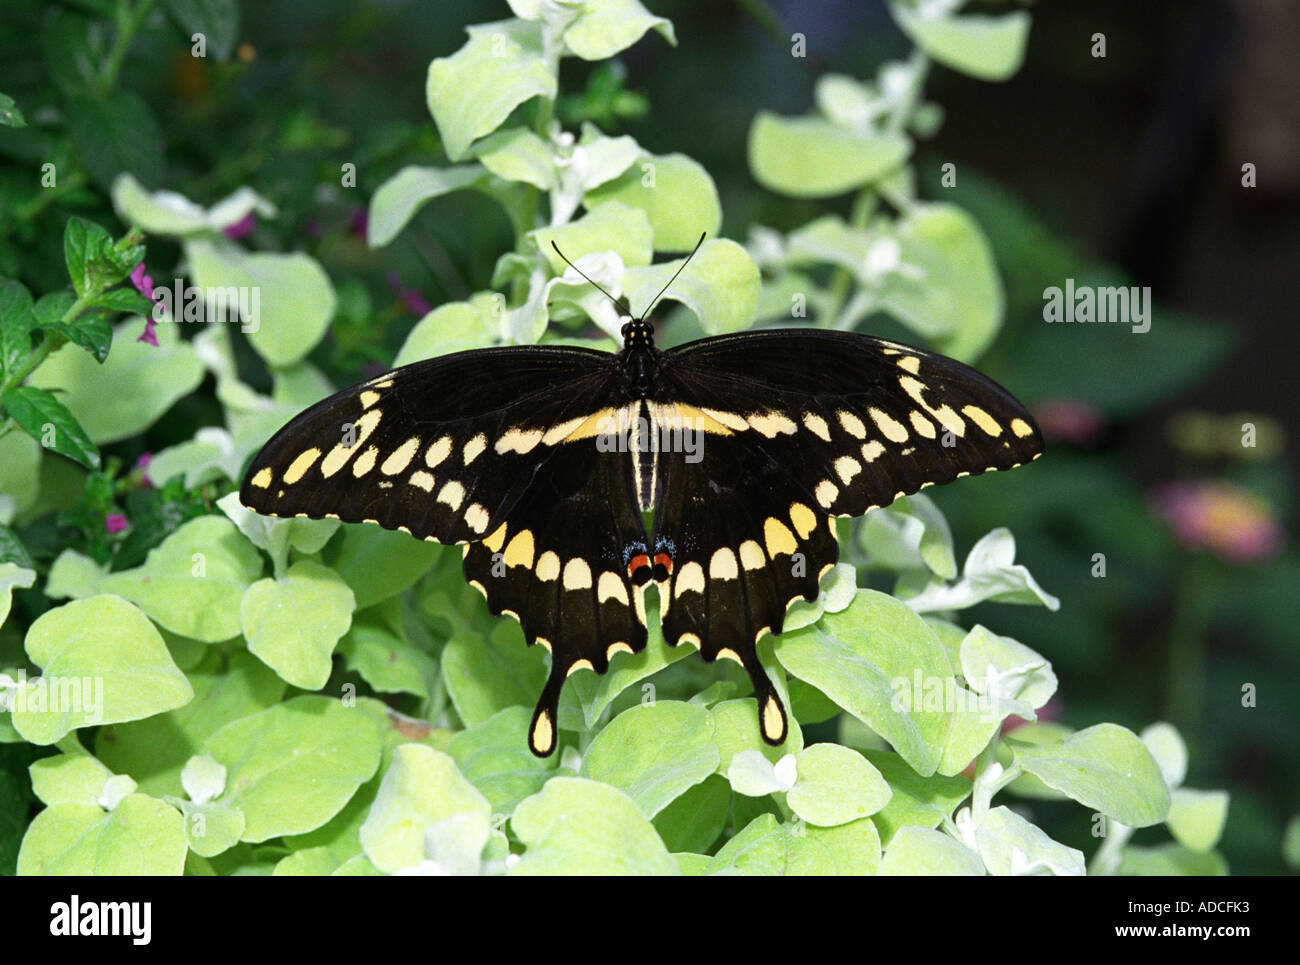 Black swallowtail butterfly (Papilio polyxenes) resting on green plant Stock Photo